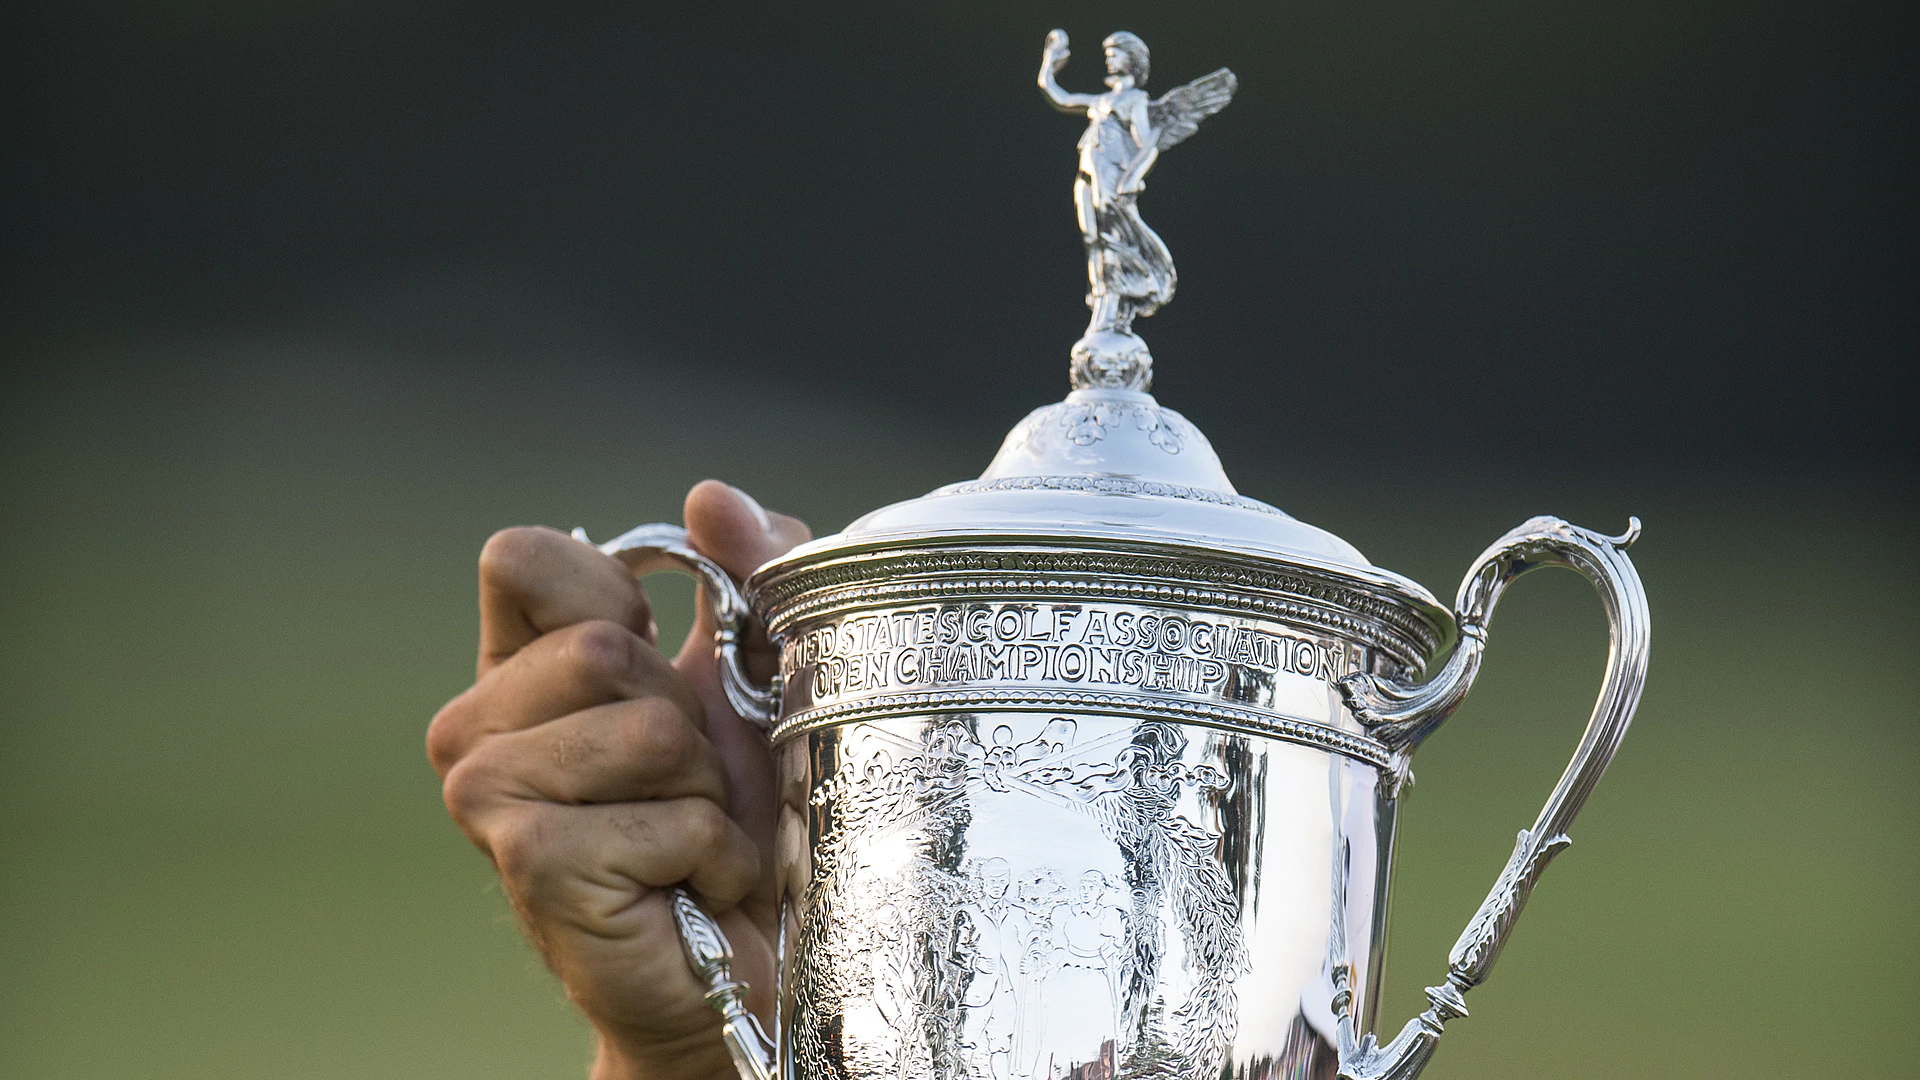 How to watch the U.S. Open on TV and online